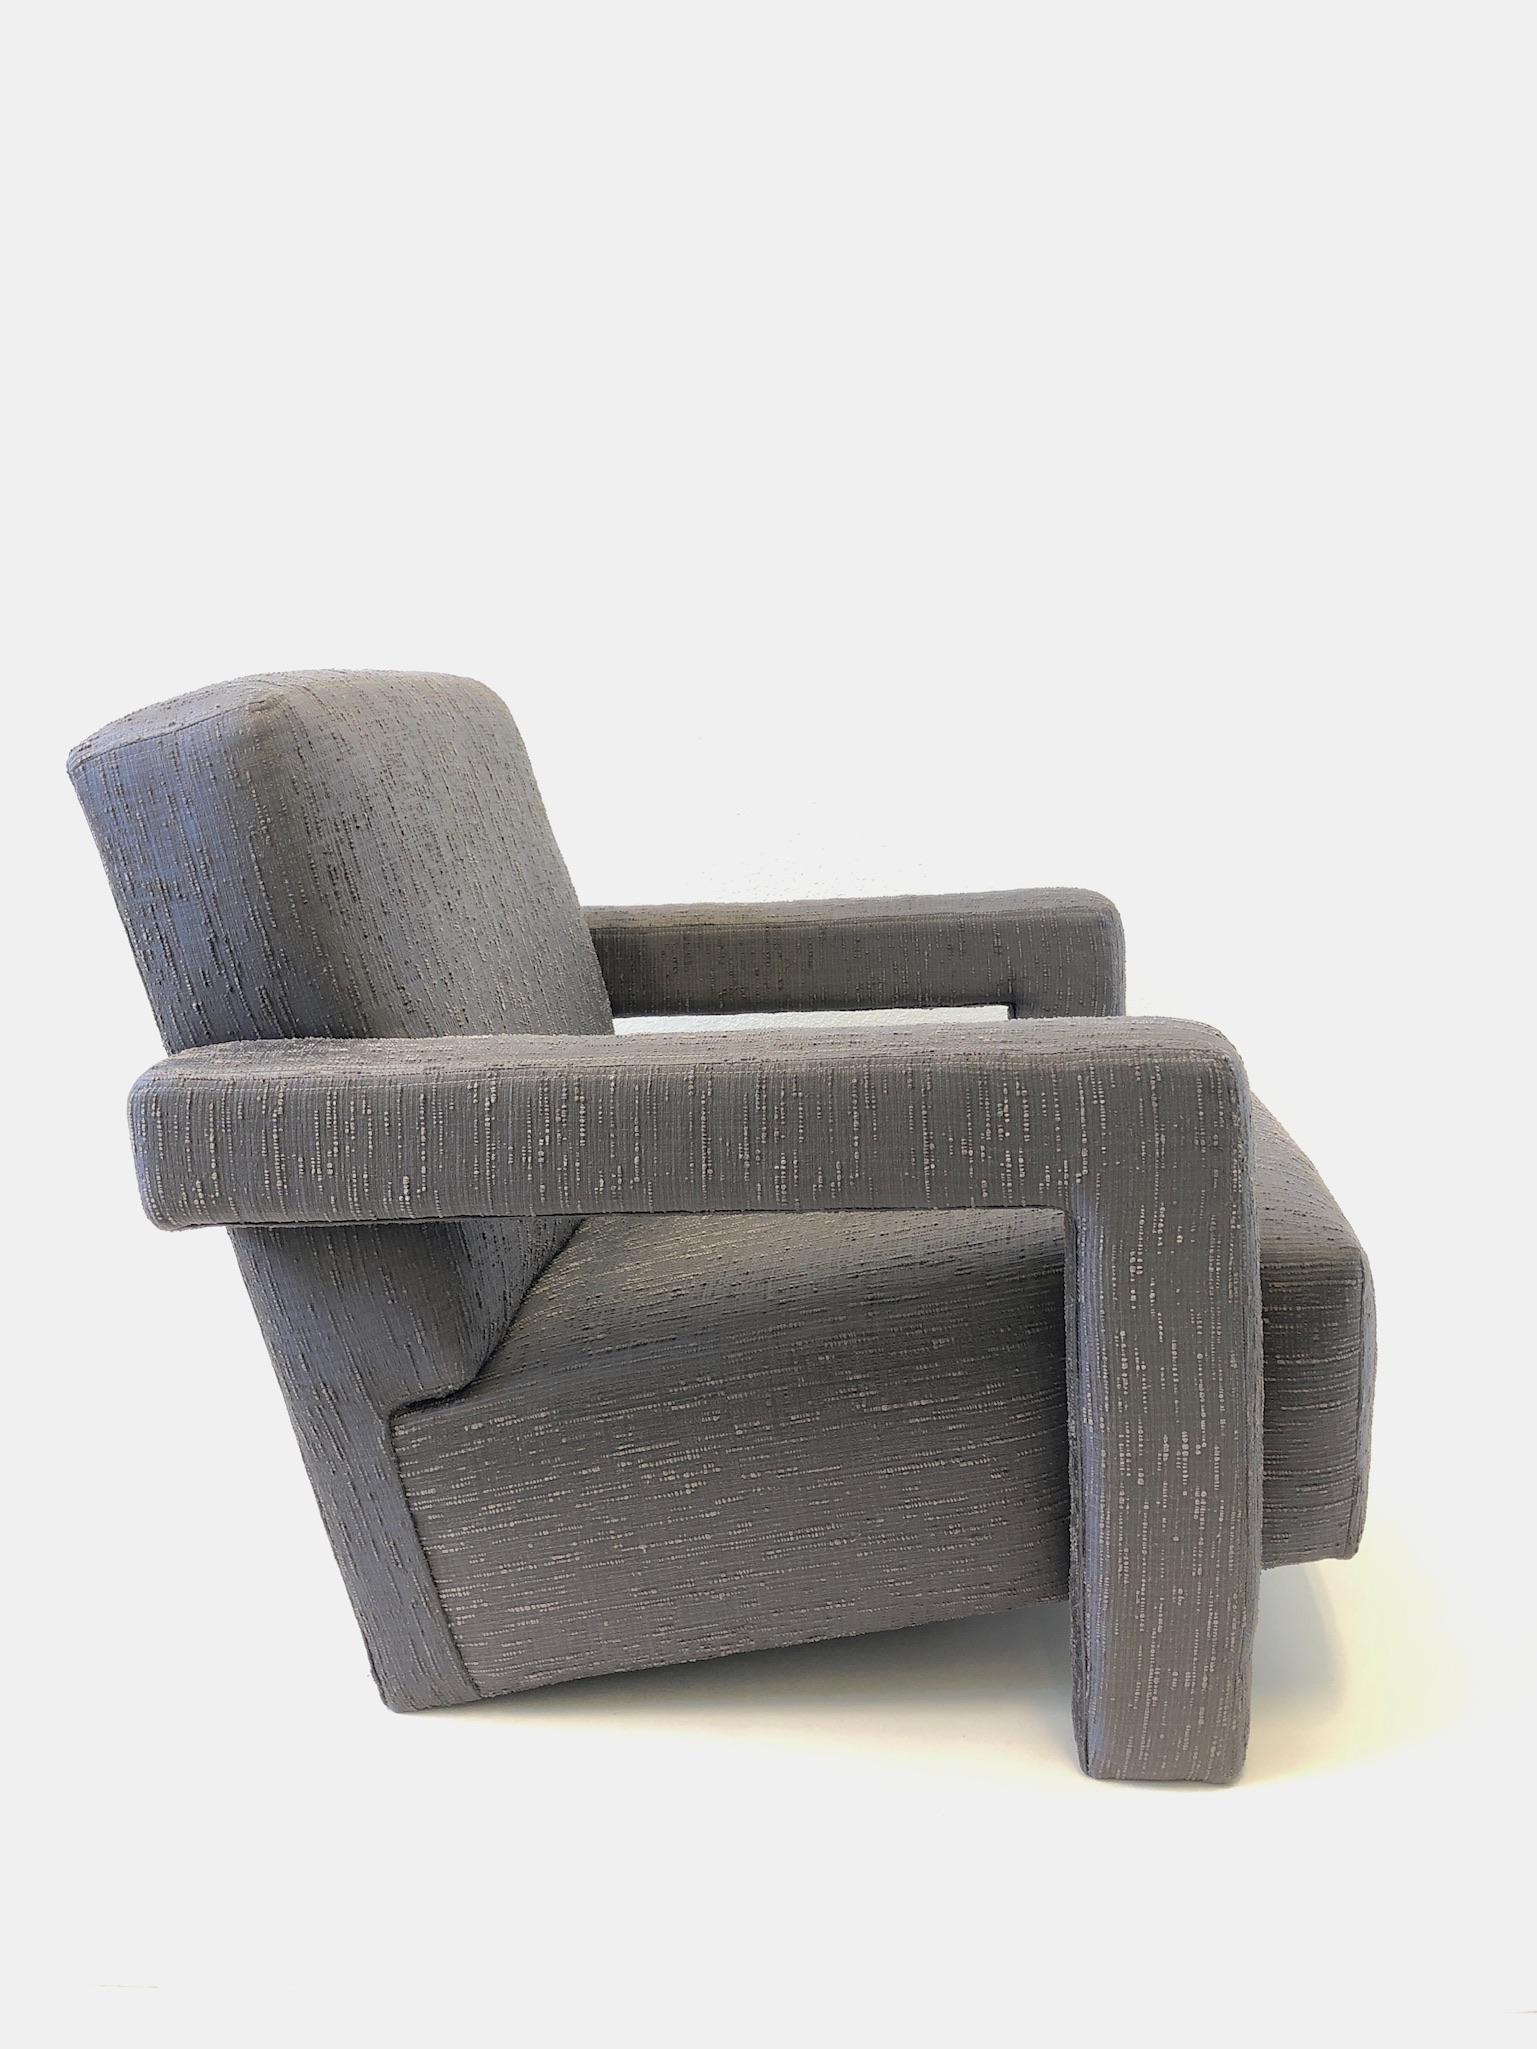 Dutch Pair of Gray Fabric Lounge Chairs by Gerrit Thomas Rietveld